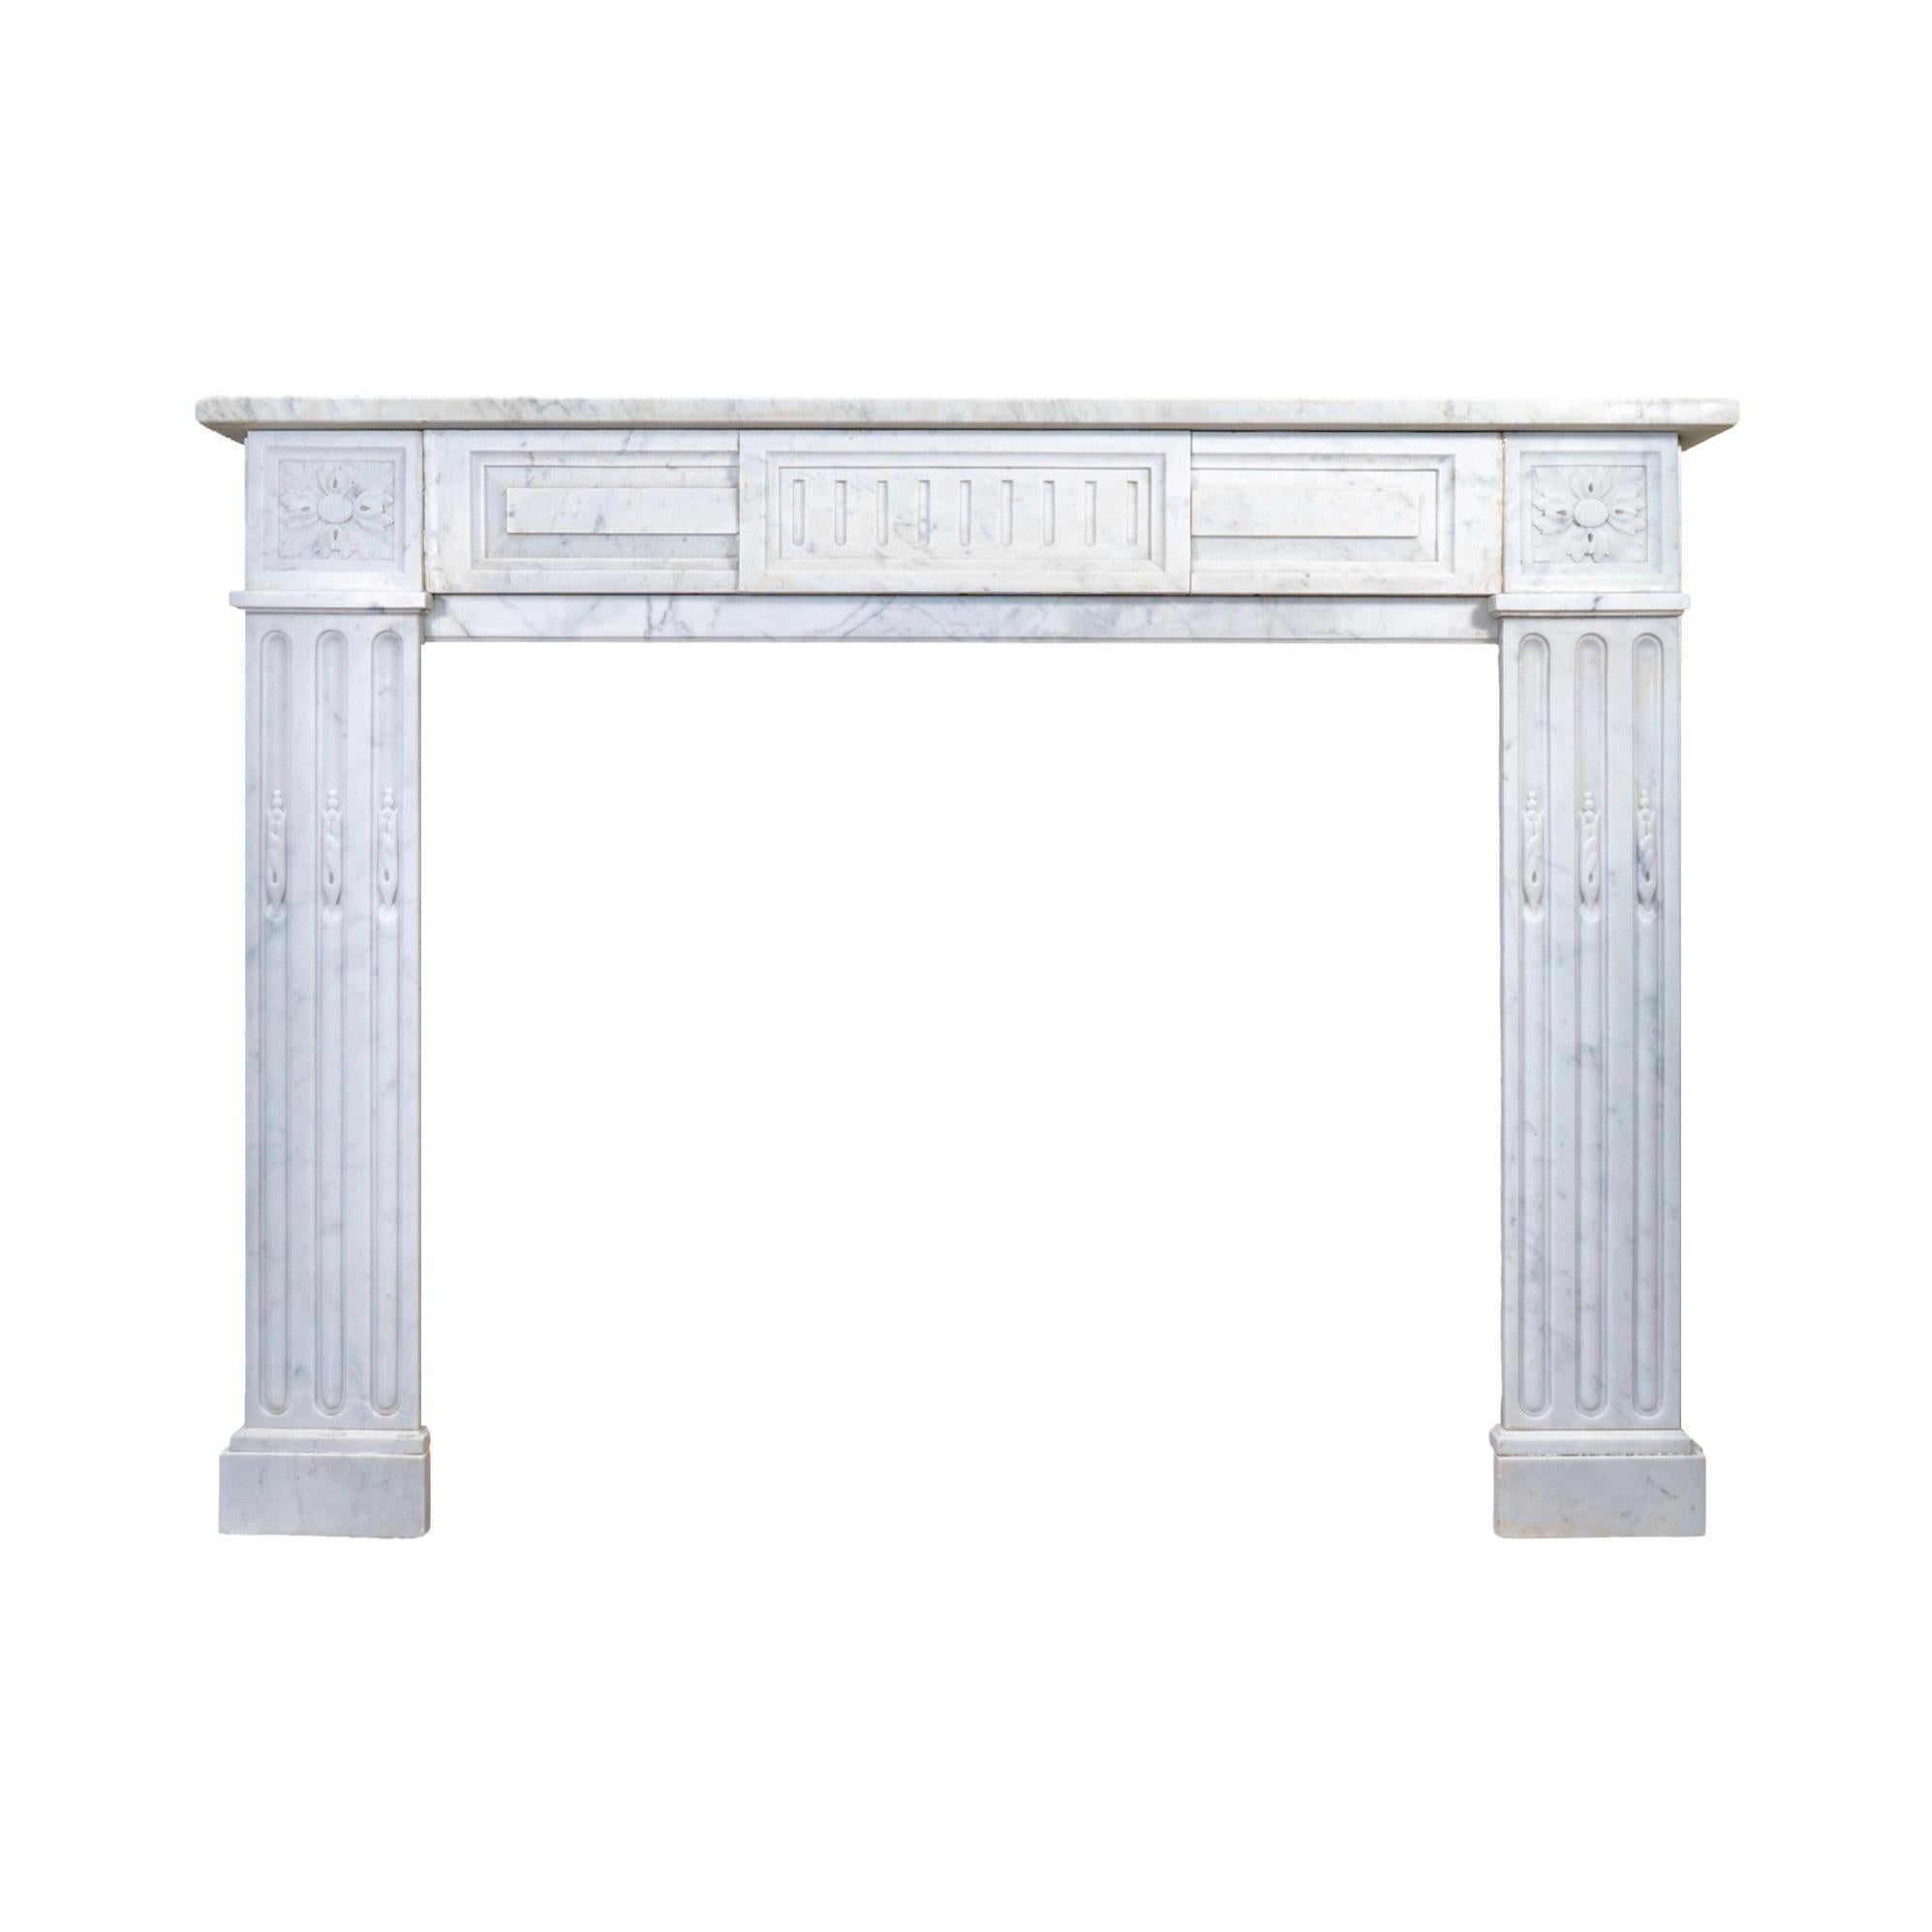 This 19th-century French White Carrara Marble Mantel exudes elegance and sophistication. Crafted from premium quality, white veined marble from France, it features exquisite styled carvings in the iconic Louis XVI style.
